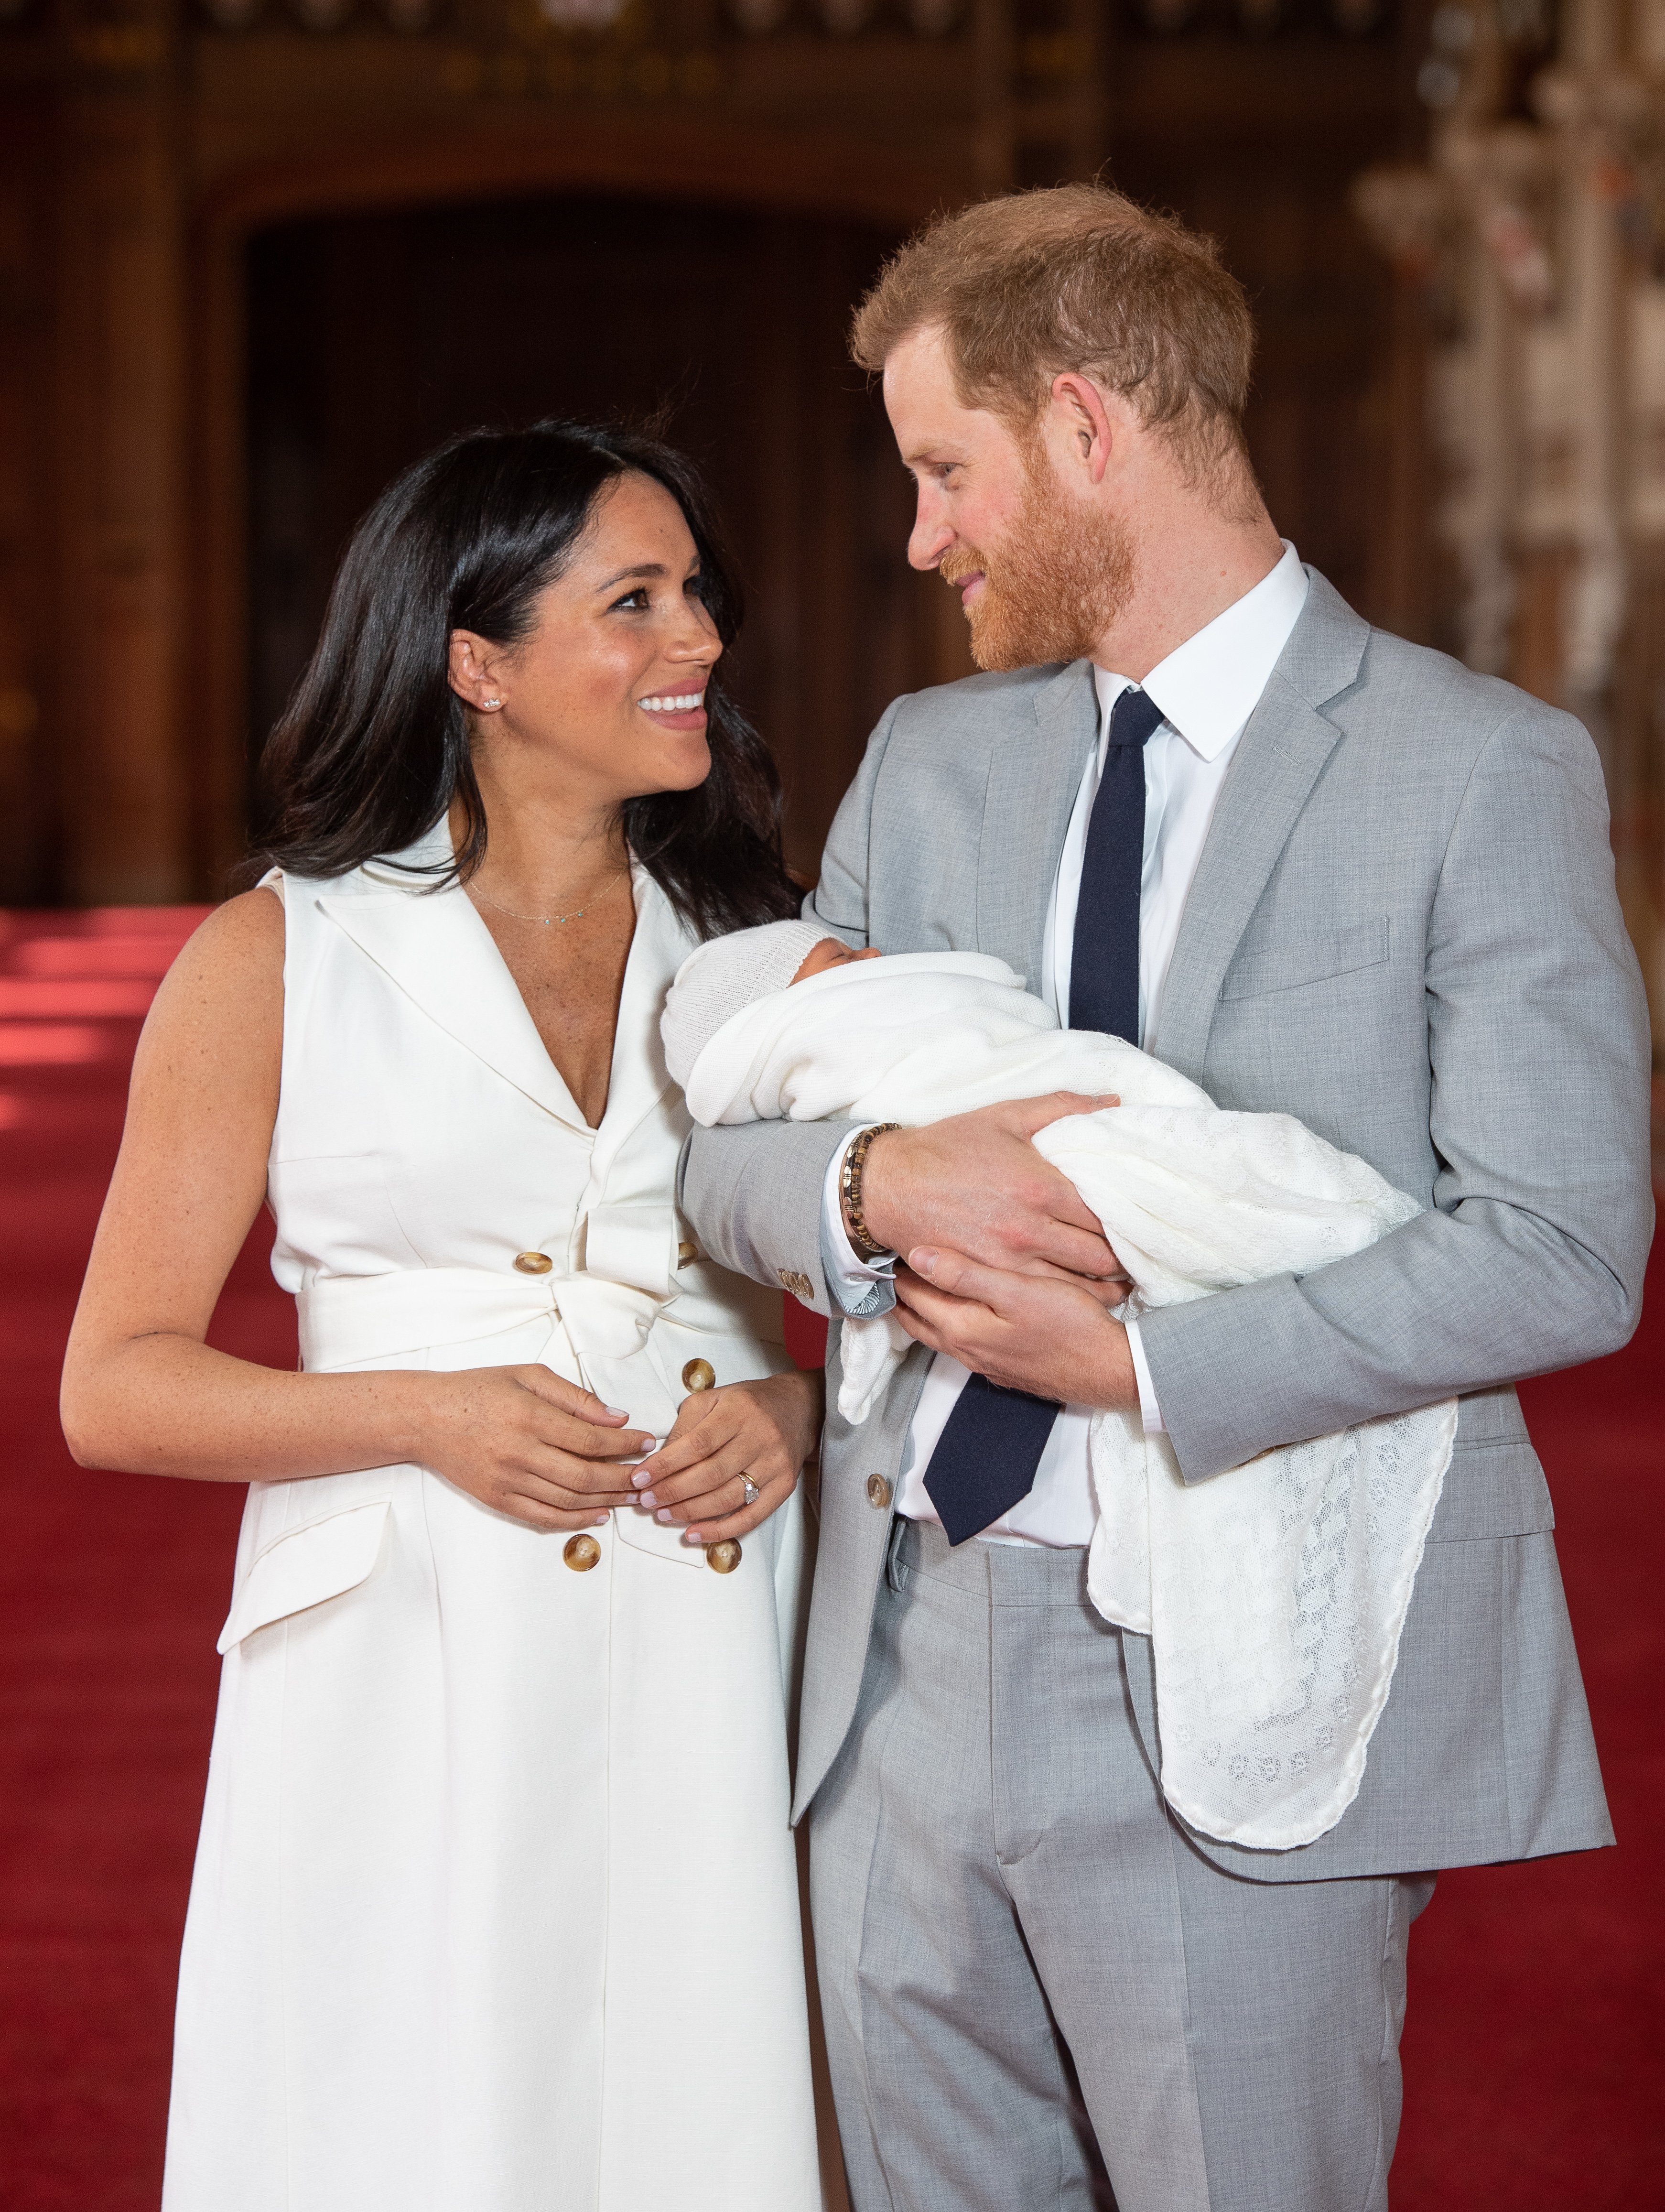 Prince Harry, Duke of Sussex and Meghan, Duchess of Sussex, pose with their newborn son Archie Harrison Mountbatten-Windsor during a photocall in St George's Hall at Windsor Castle on May 8, 2019 in Windsor, England | Source: Getty Images 